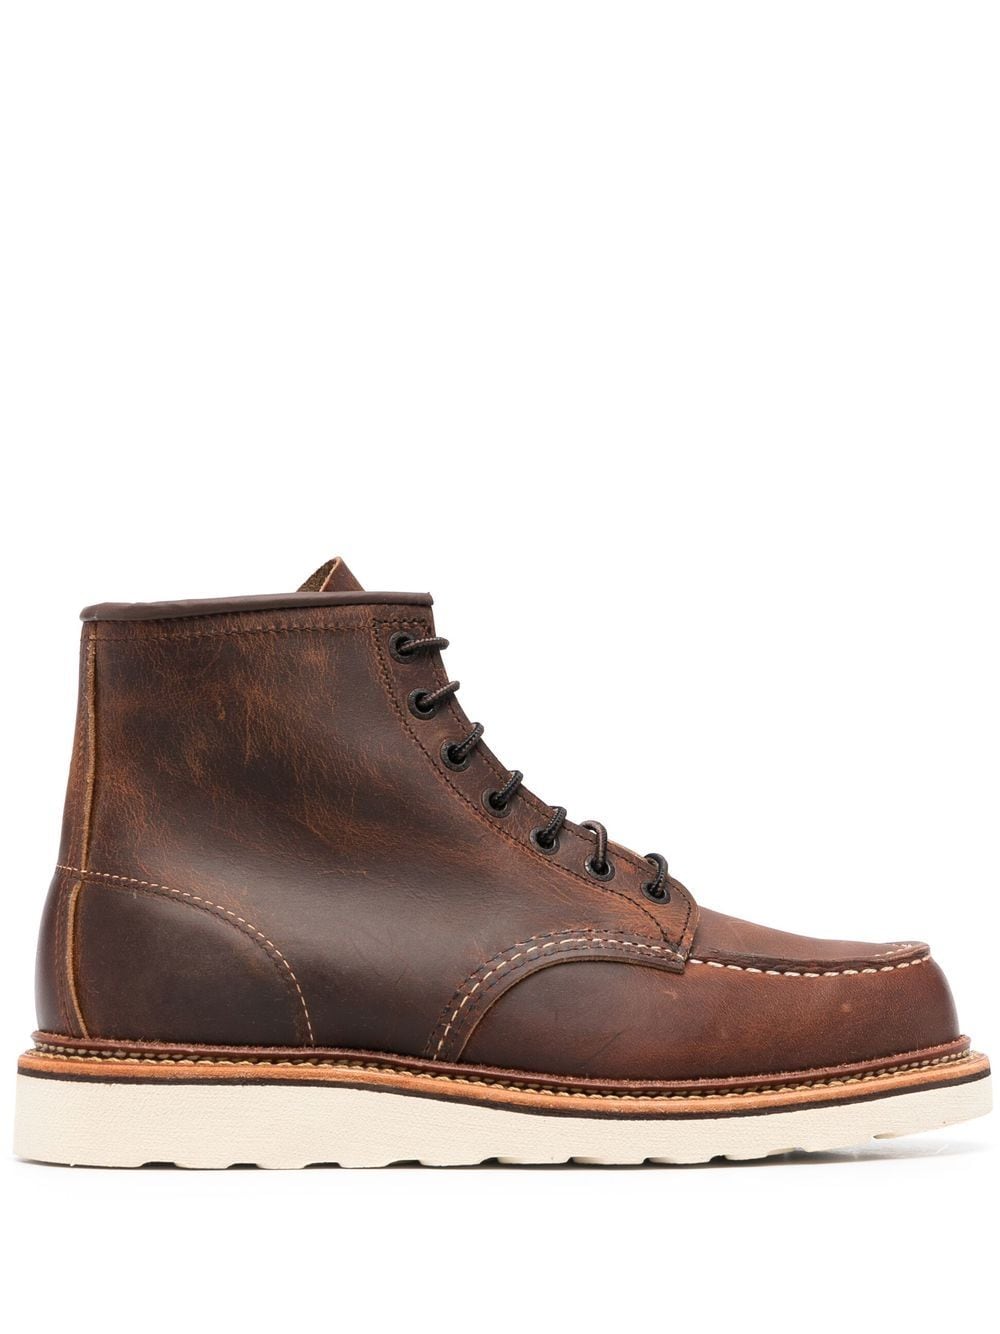 Red Wing Shoes 1907 Heritage Work Moc Toe Stiefel - Braun von Red Wing Shoes